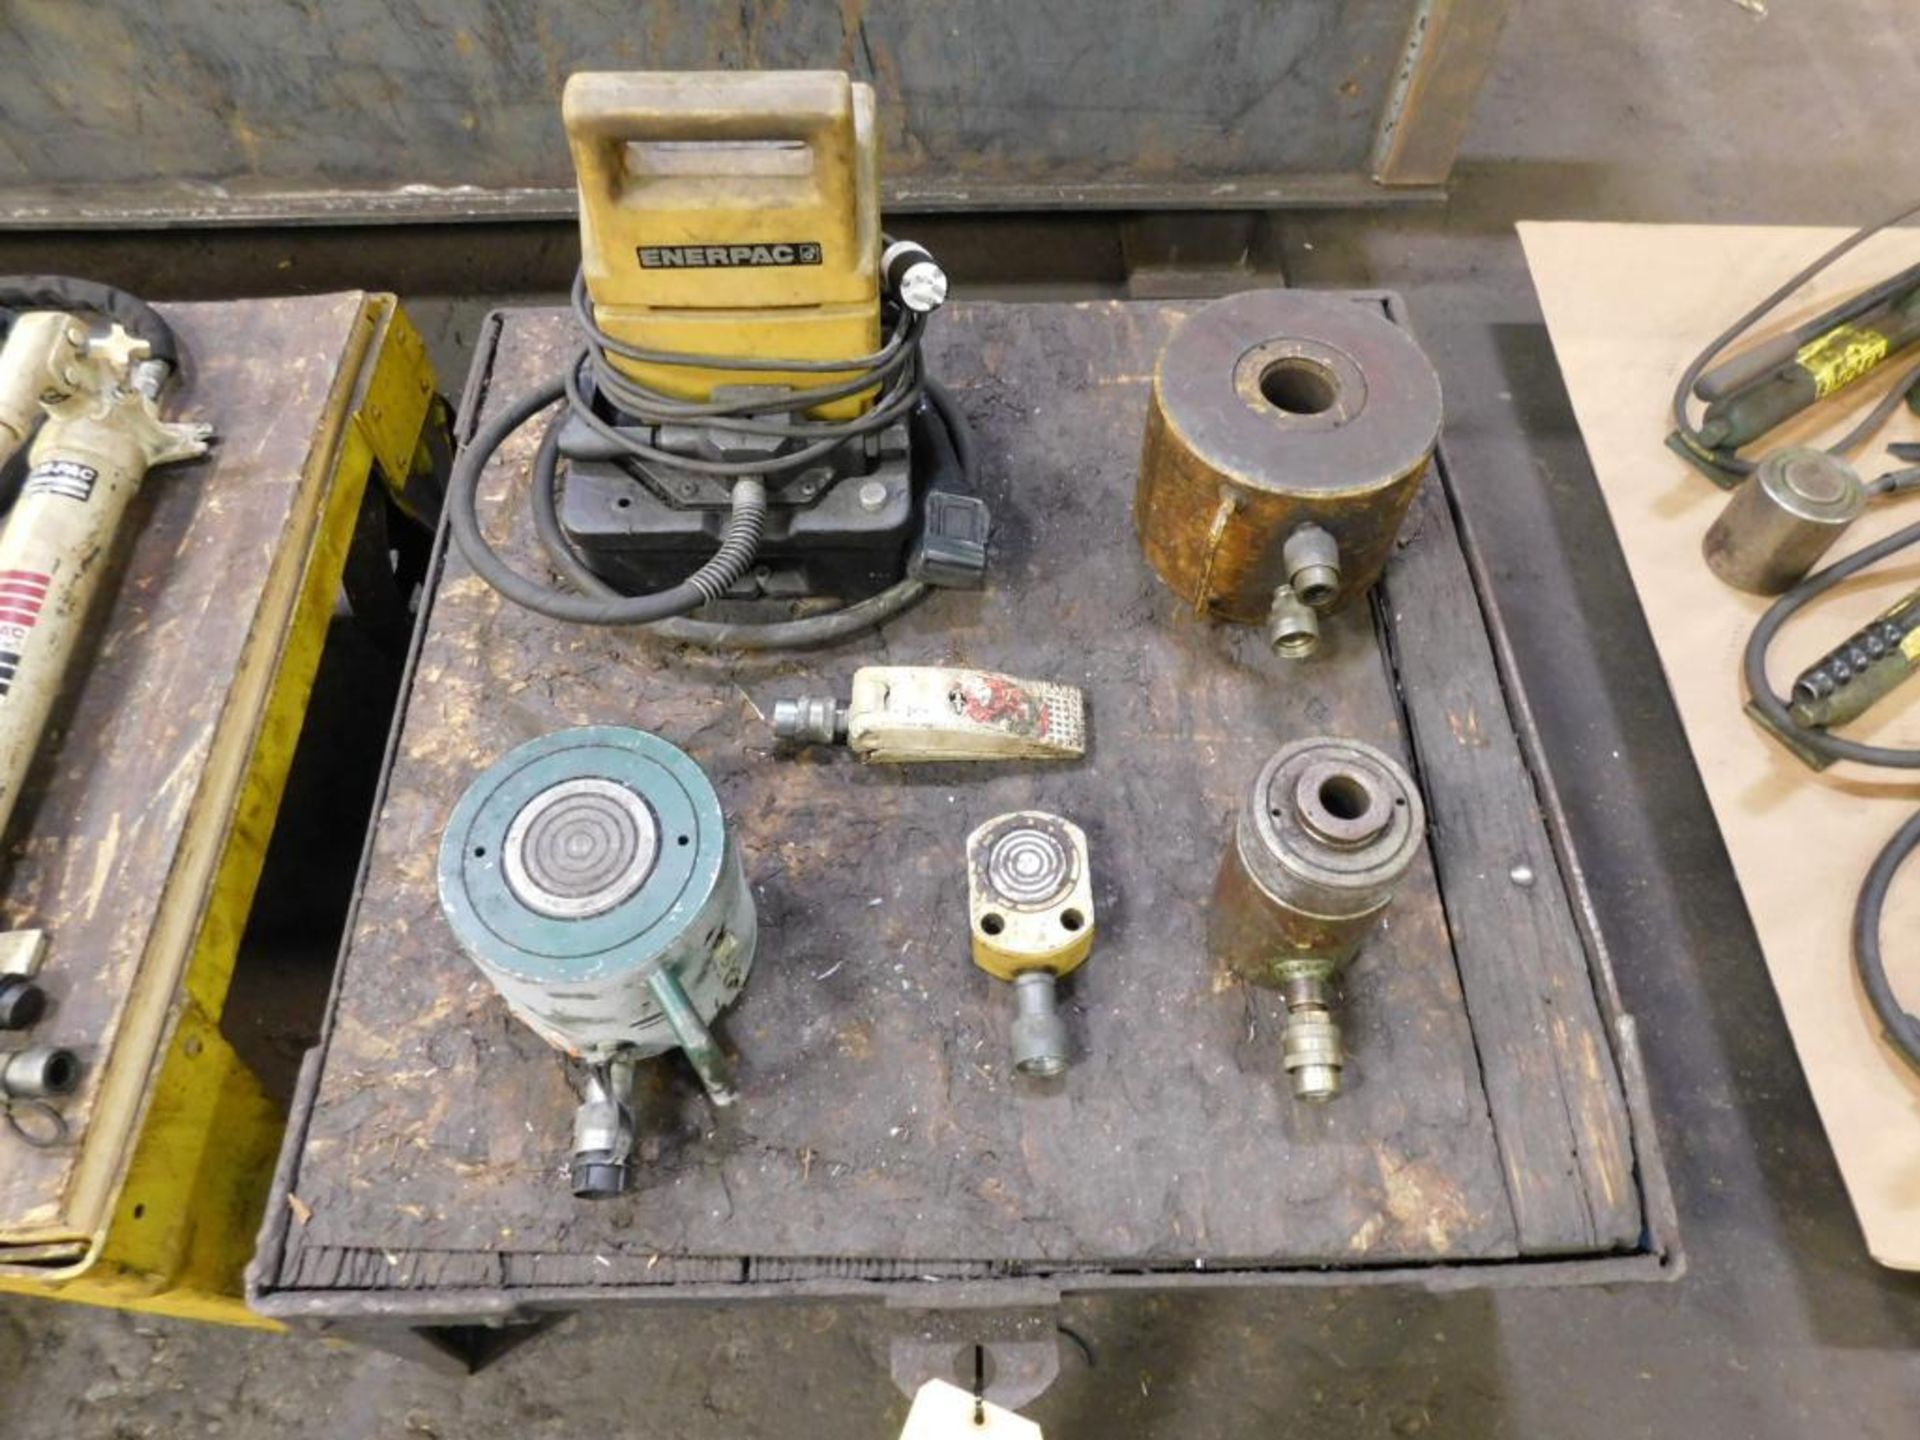 LOT: Enerpac Electric Hydraulic Power Unit w/Hand Control and Accessories - Image 4 of 5